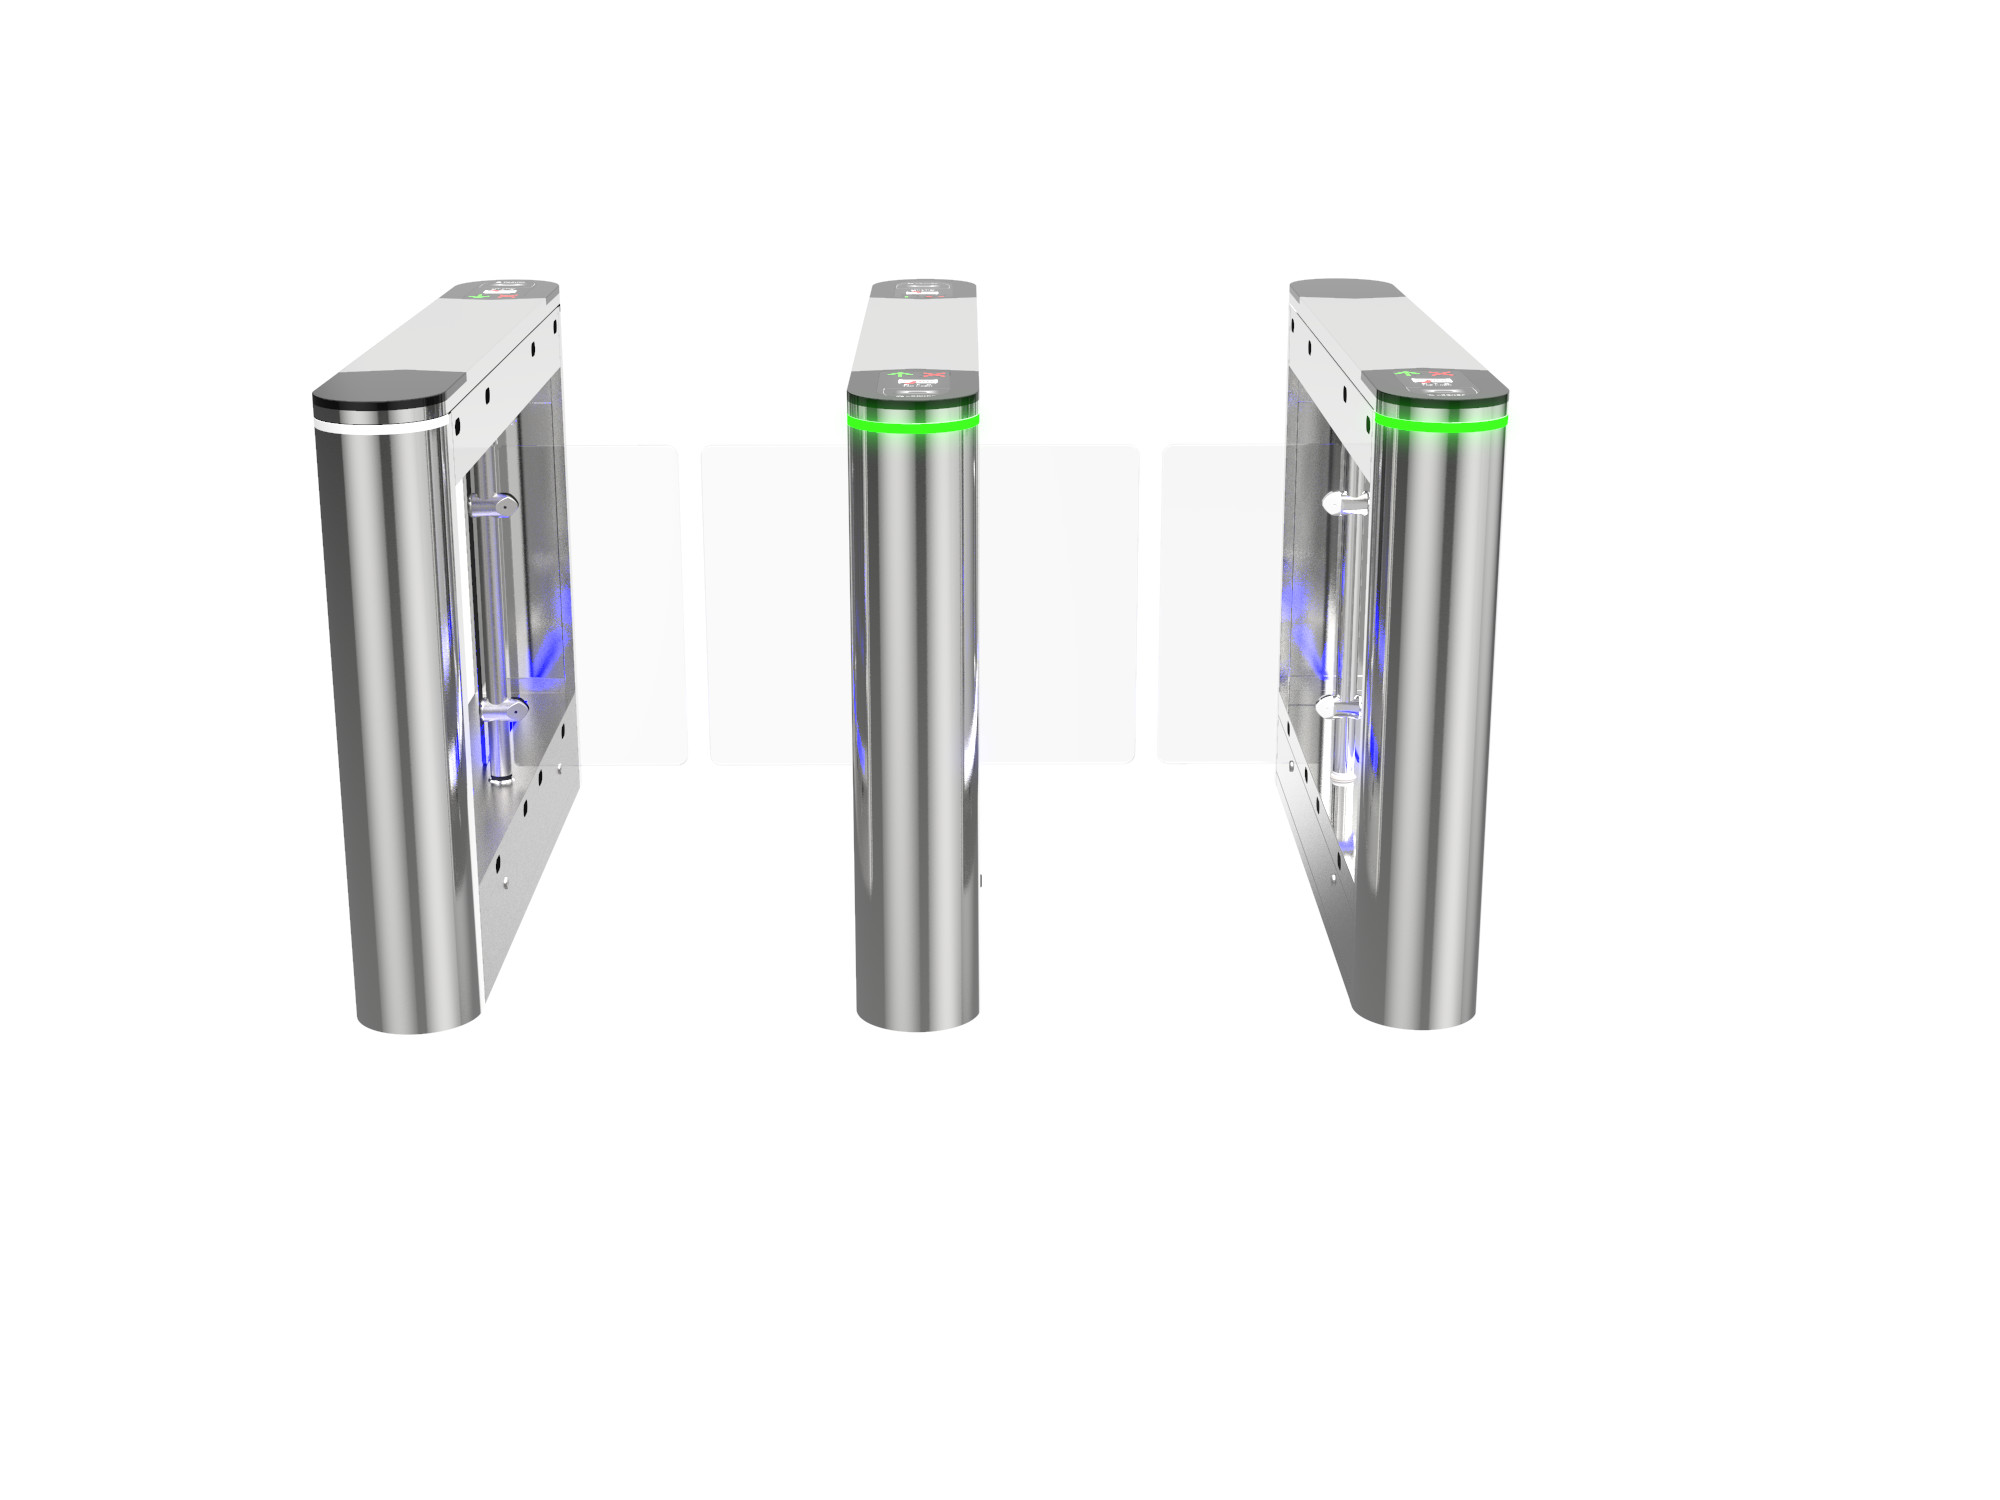 Stainless Arm Swing Gate Turnstile Gate With Led Lighting Card QR Code